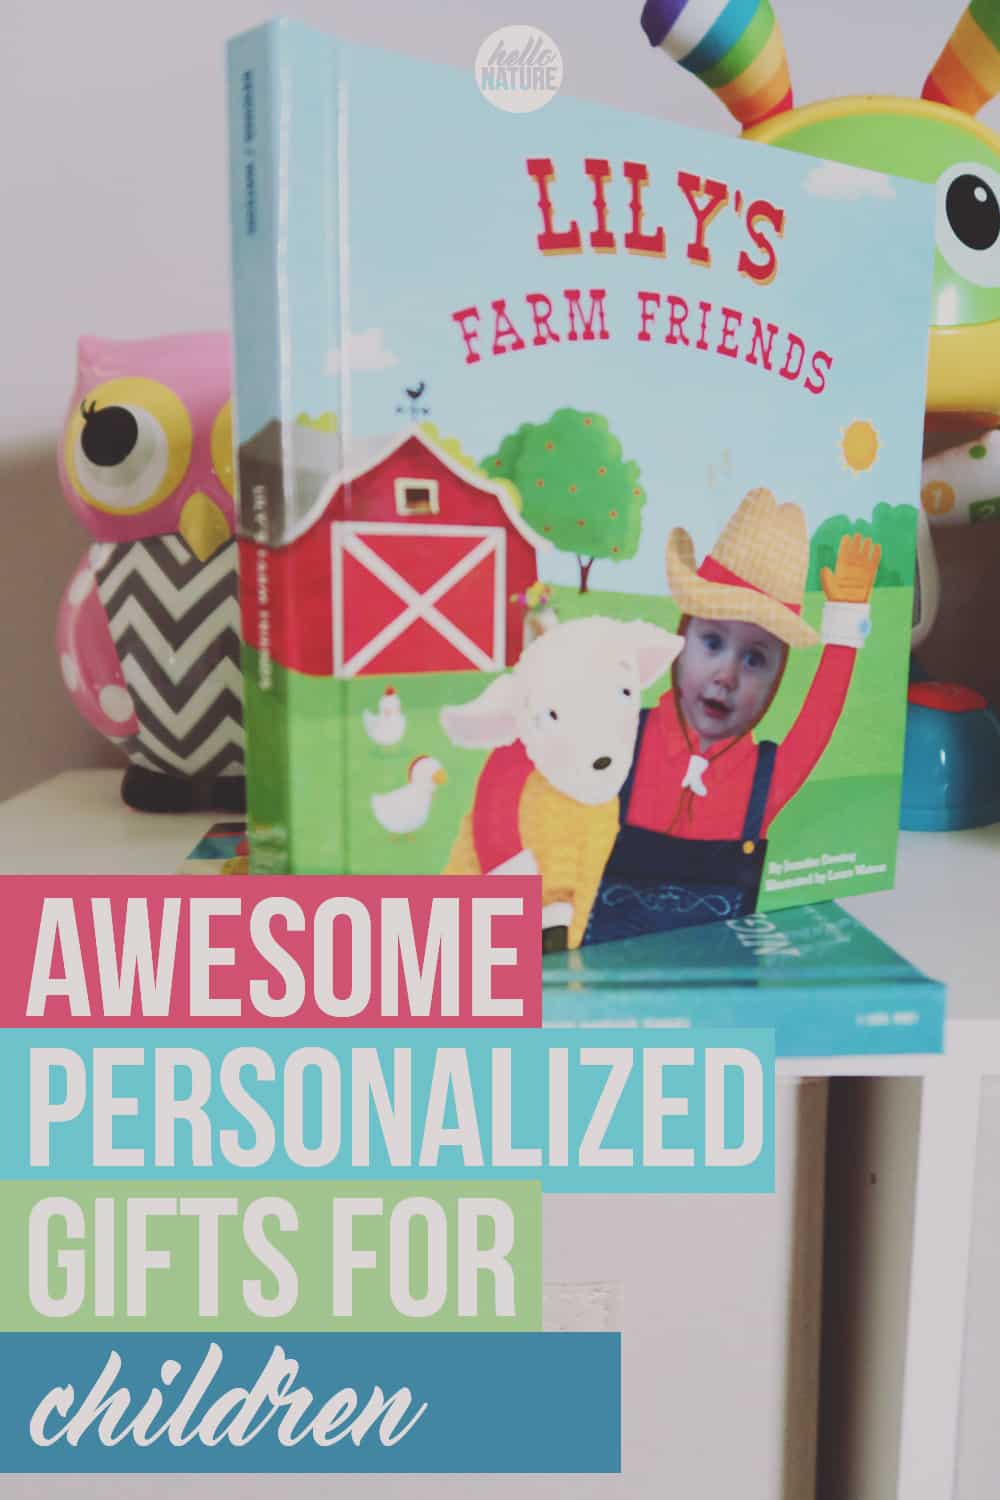 If you want to get your child a unique gift that is made just for them, you have to see the awesome personalized gifts for children from I See Me!